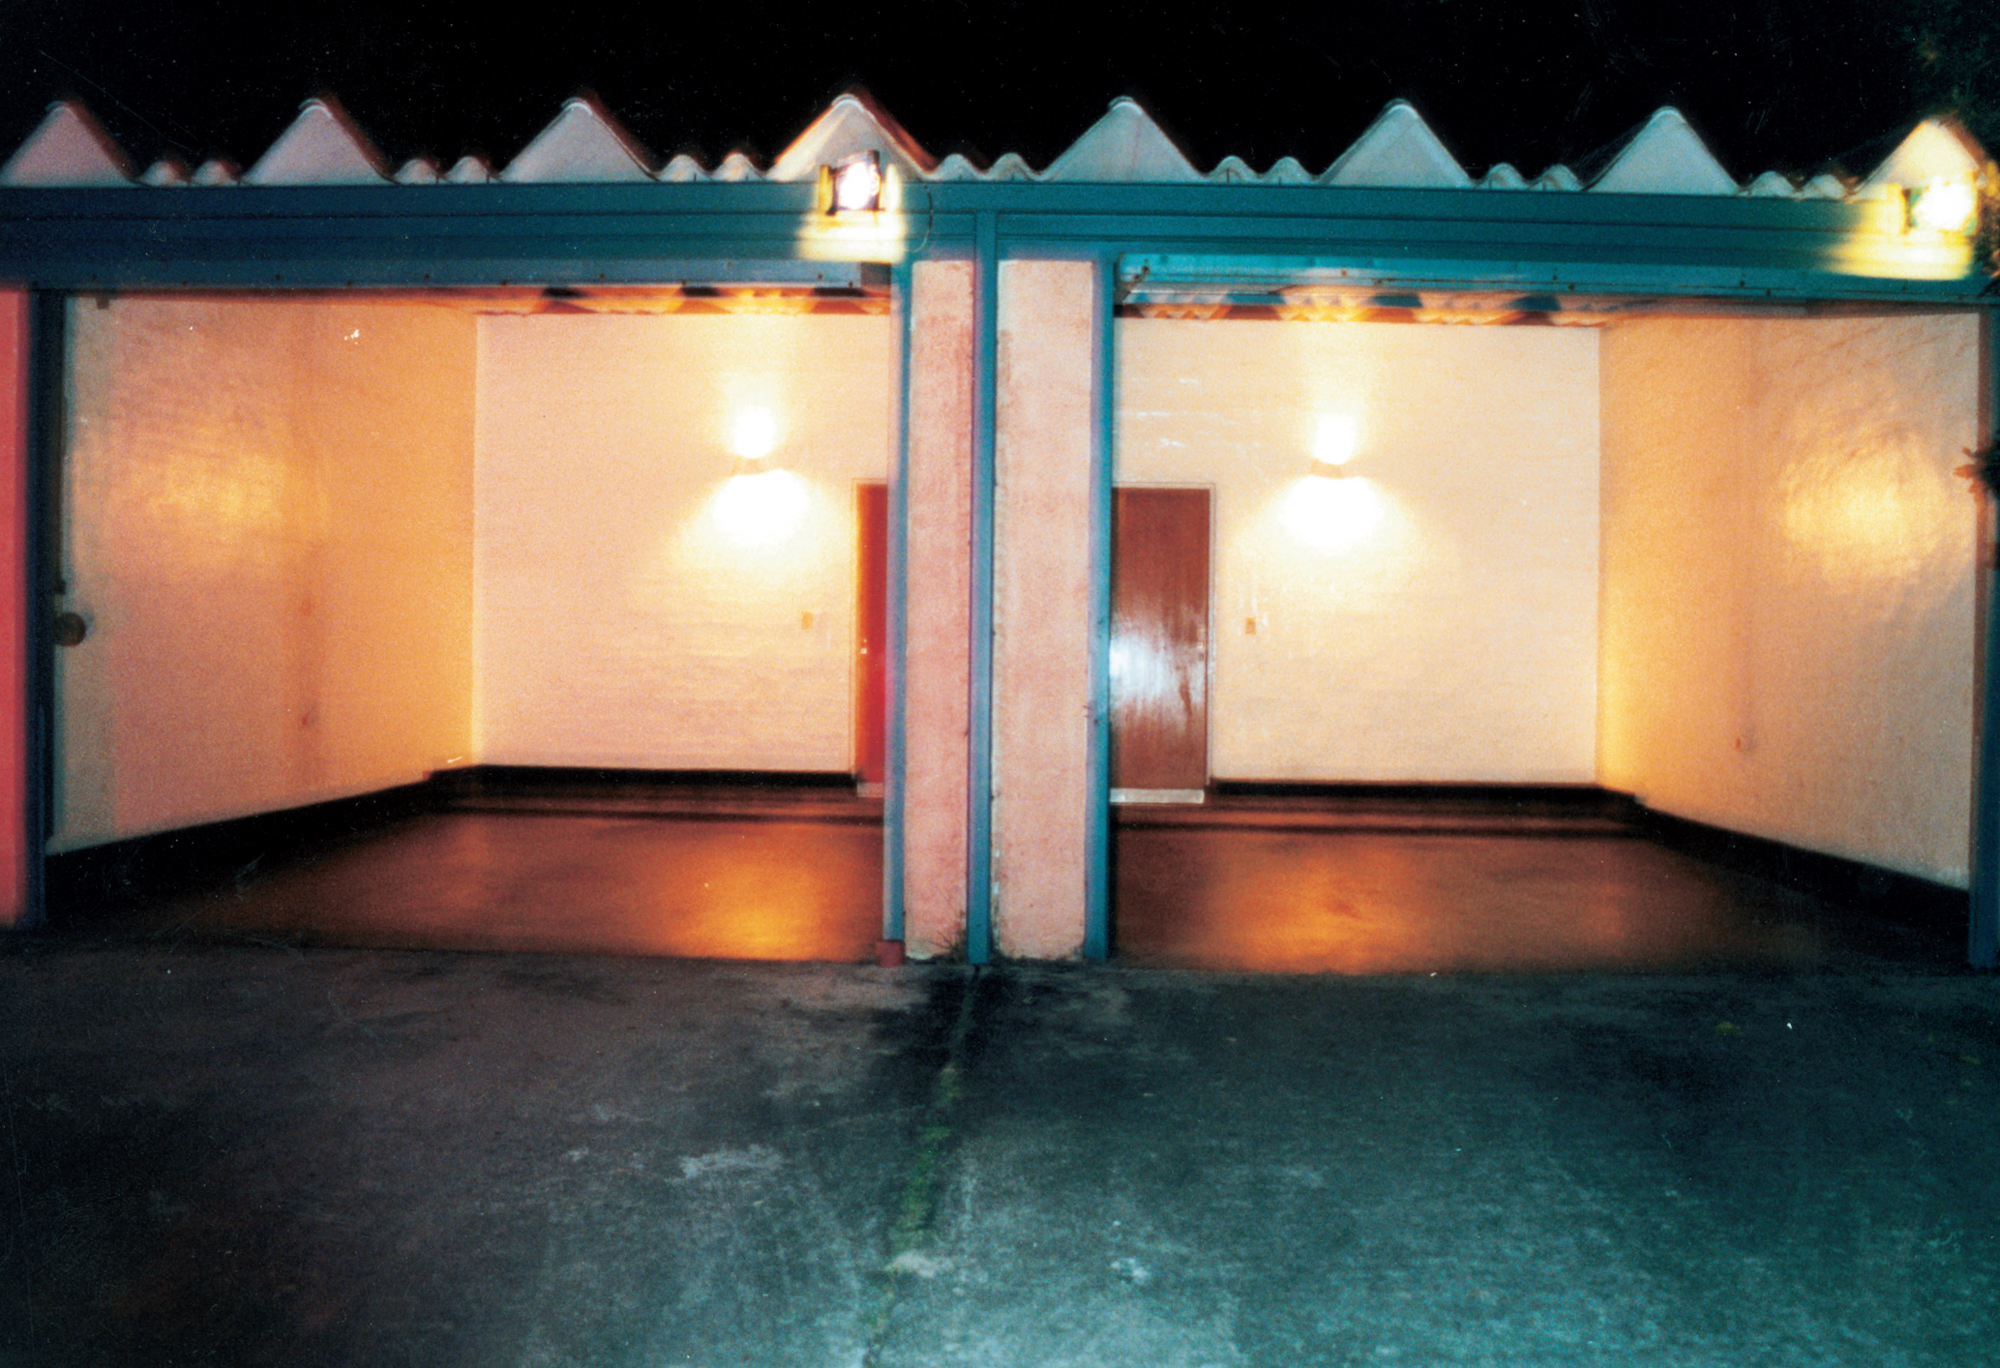 A photograph of the garage of a “telo” at night with the lights on inside.